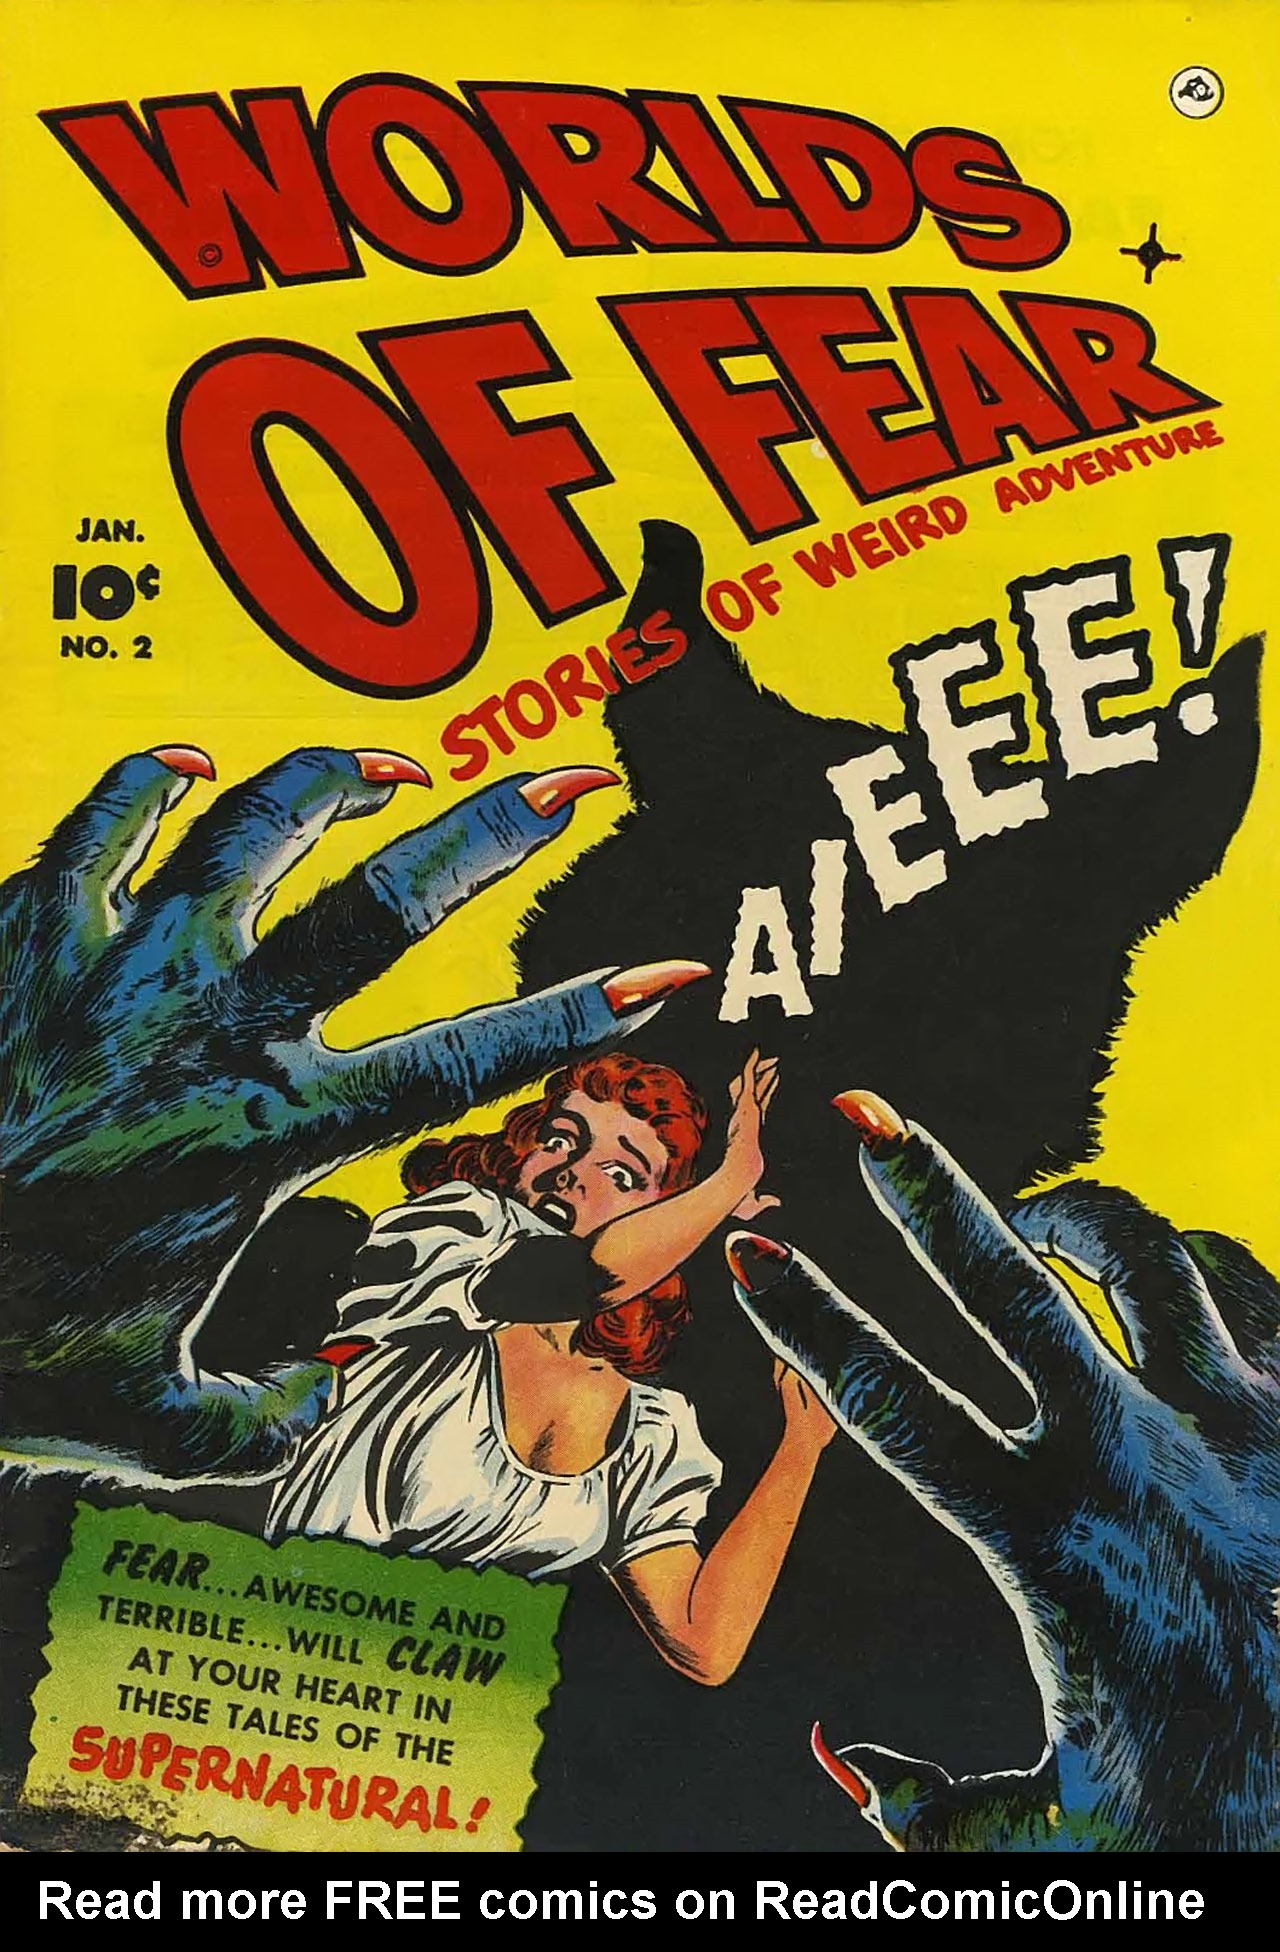 Read online Worlds of Fear comic -  Issue #2 - 1